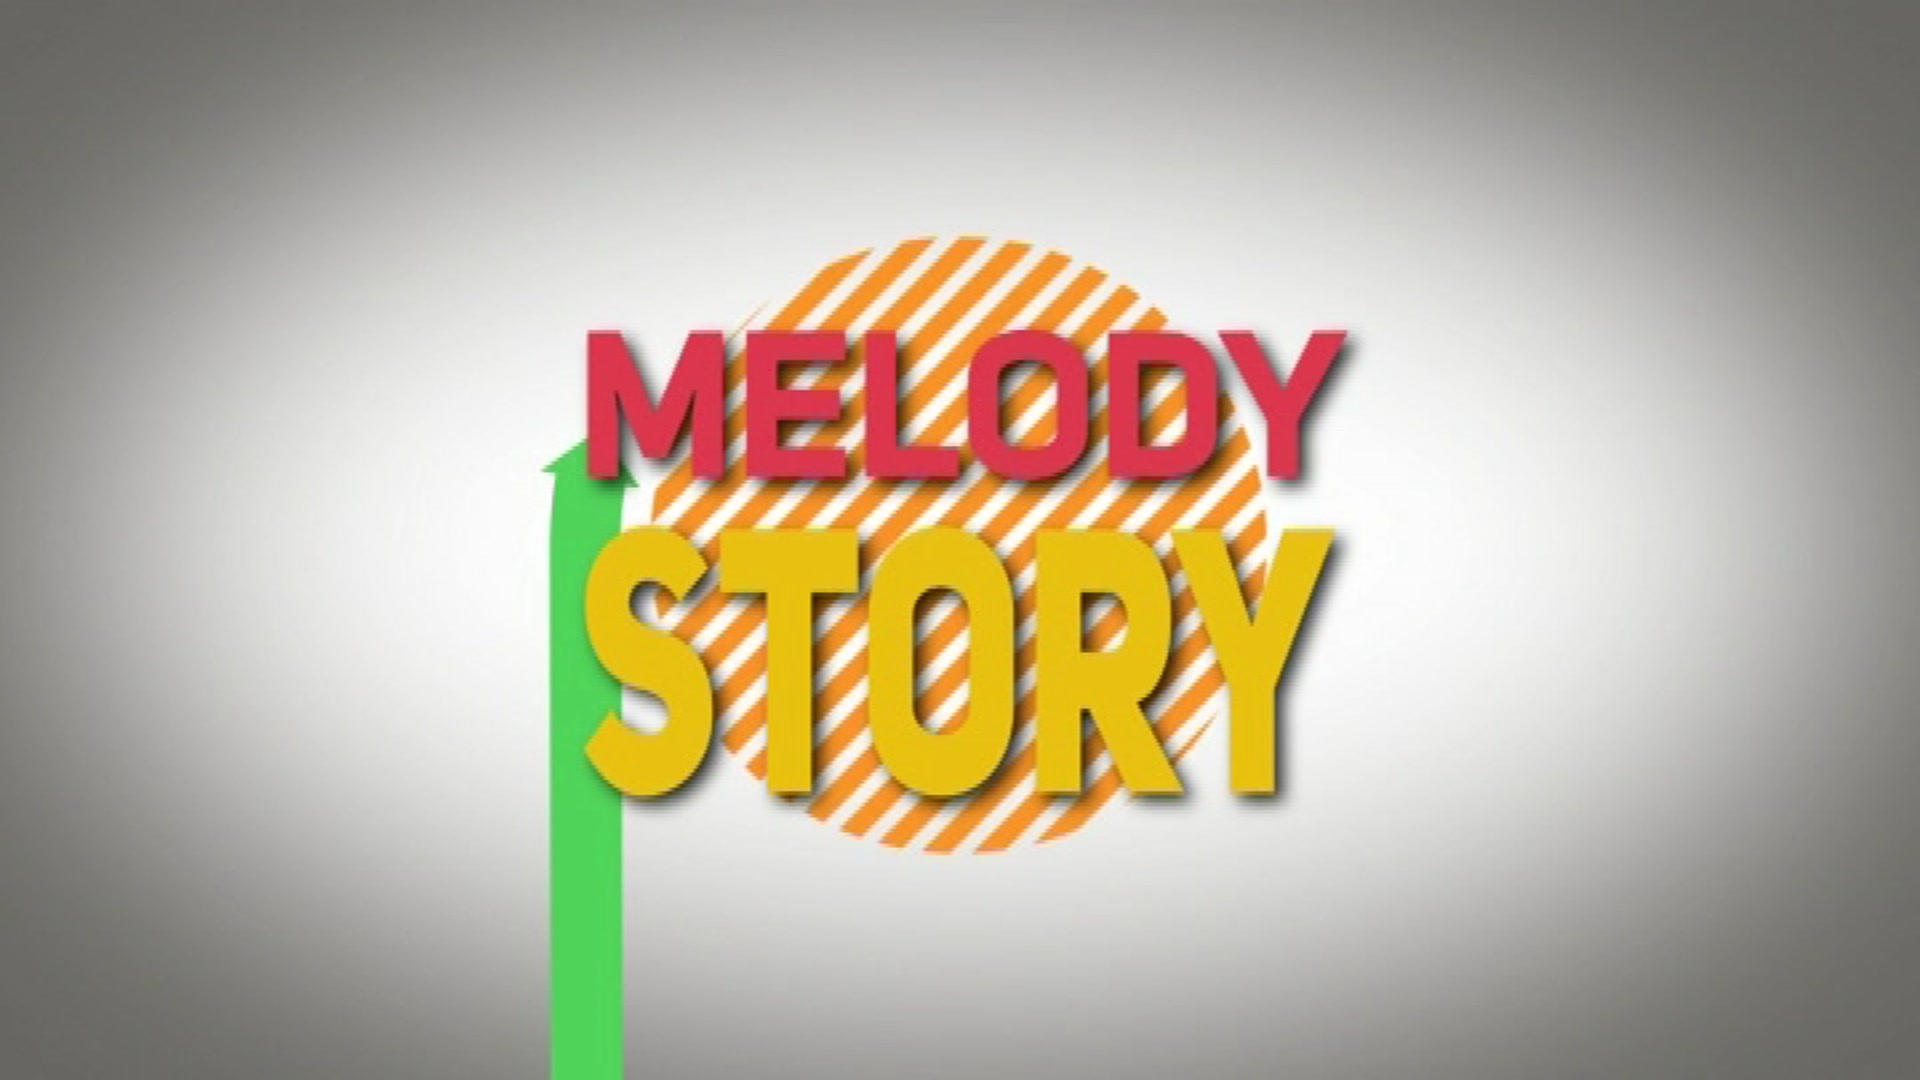 L'horloge tourne MELODY STORY OUT